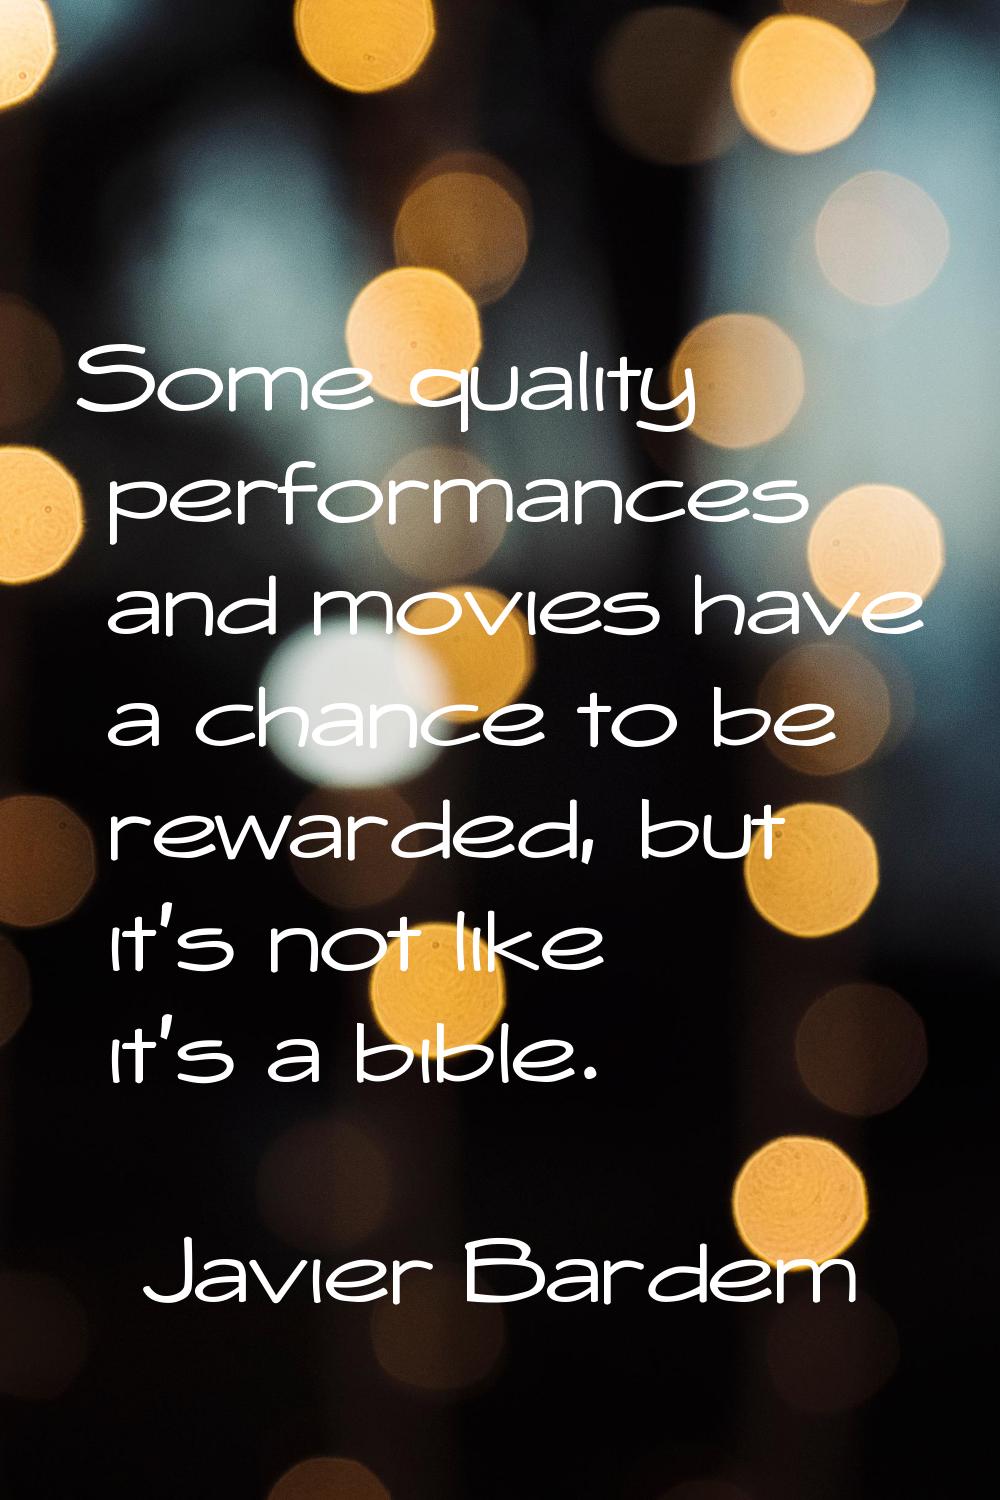 Some quality performances and movies have a chance to be rewarded, but it's not like it's a bible.